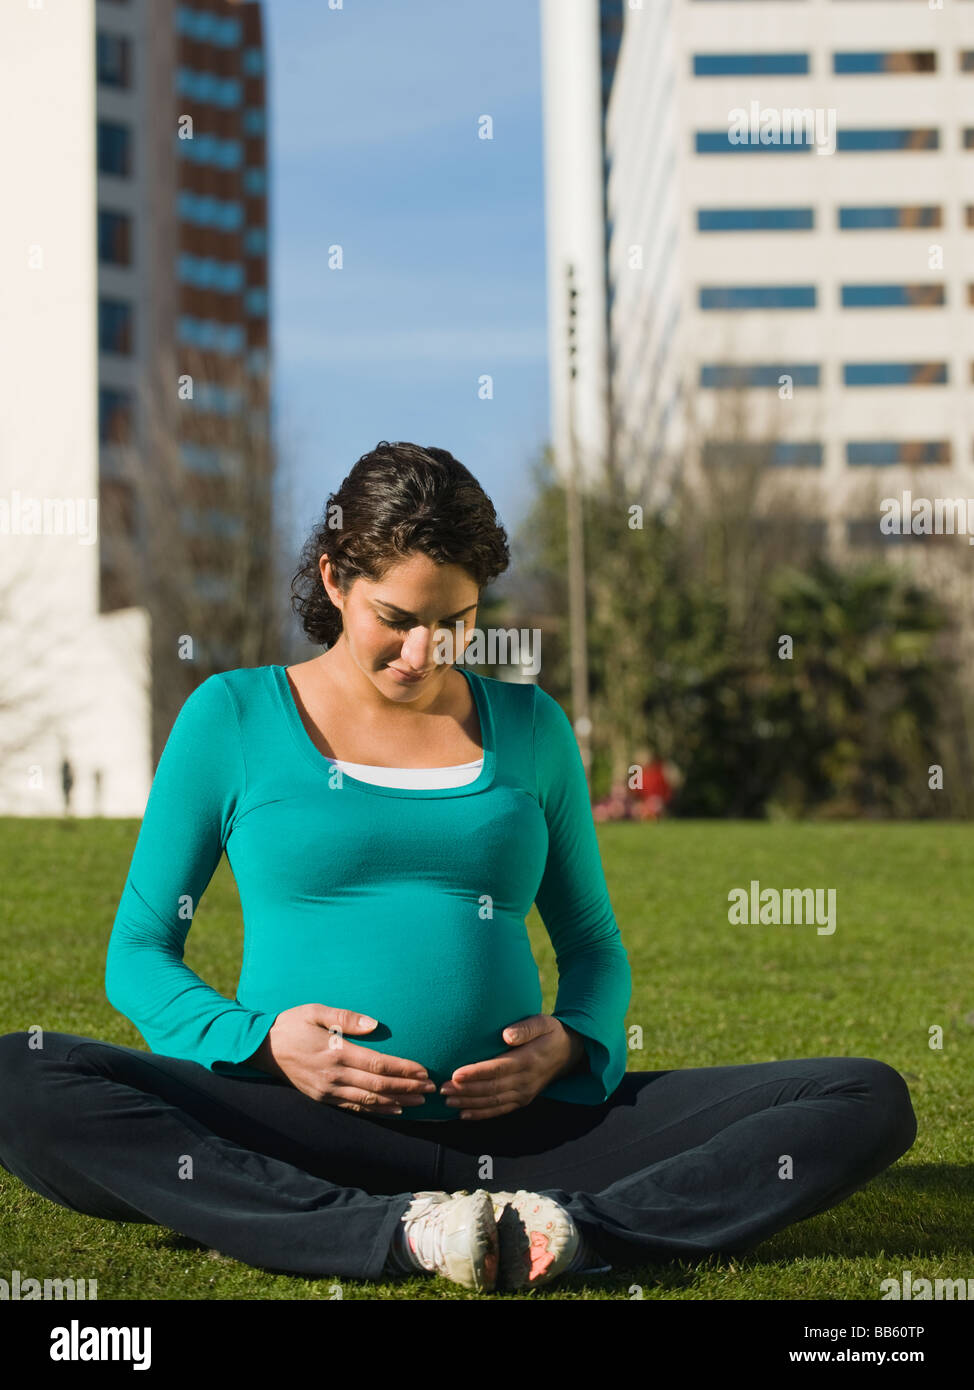 Pregnant Middle Eastern woman practicing yoga in park Banque D'Images